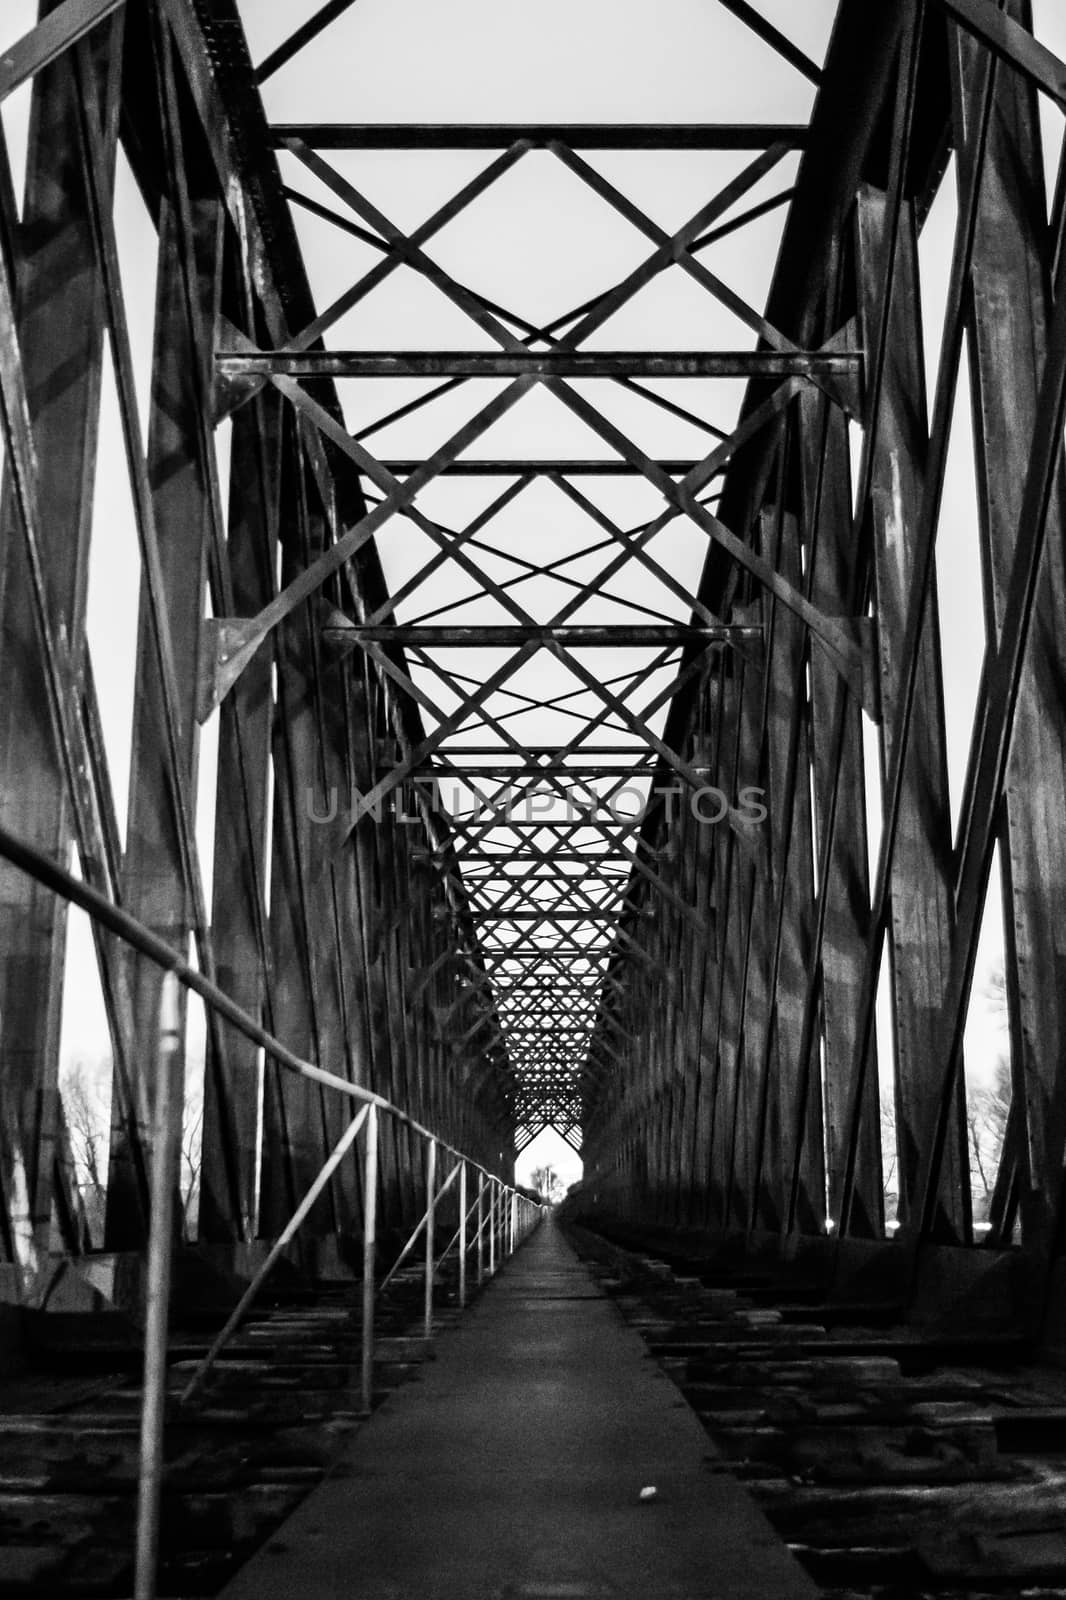 Black and white old industrial railway railroad iron bridge center perspective in night